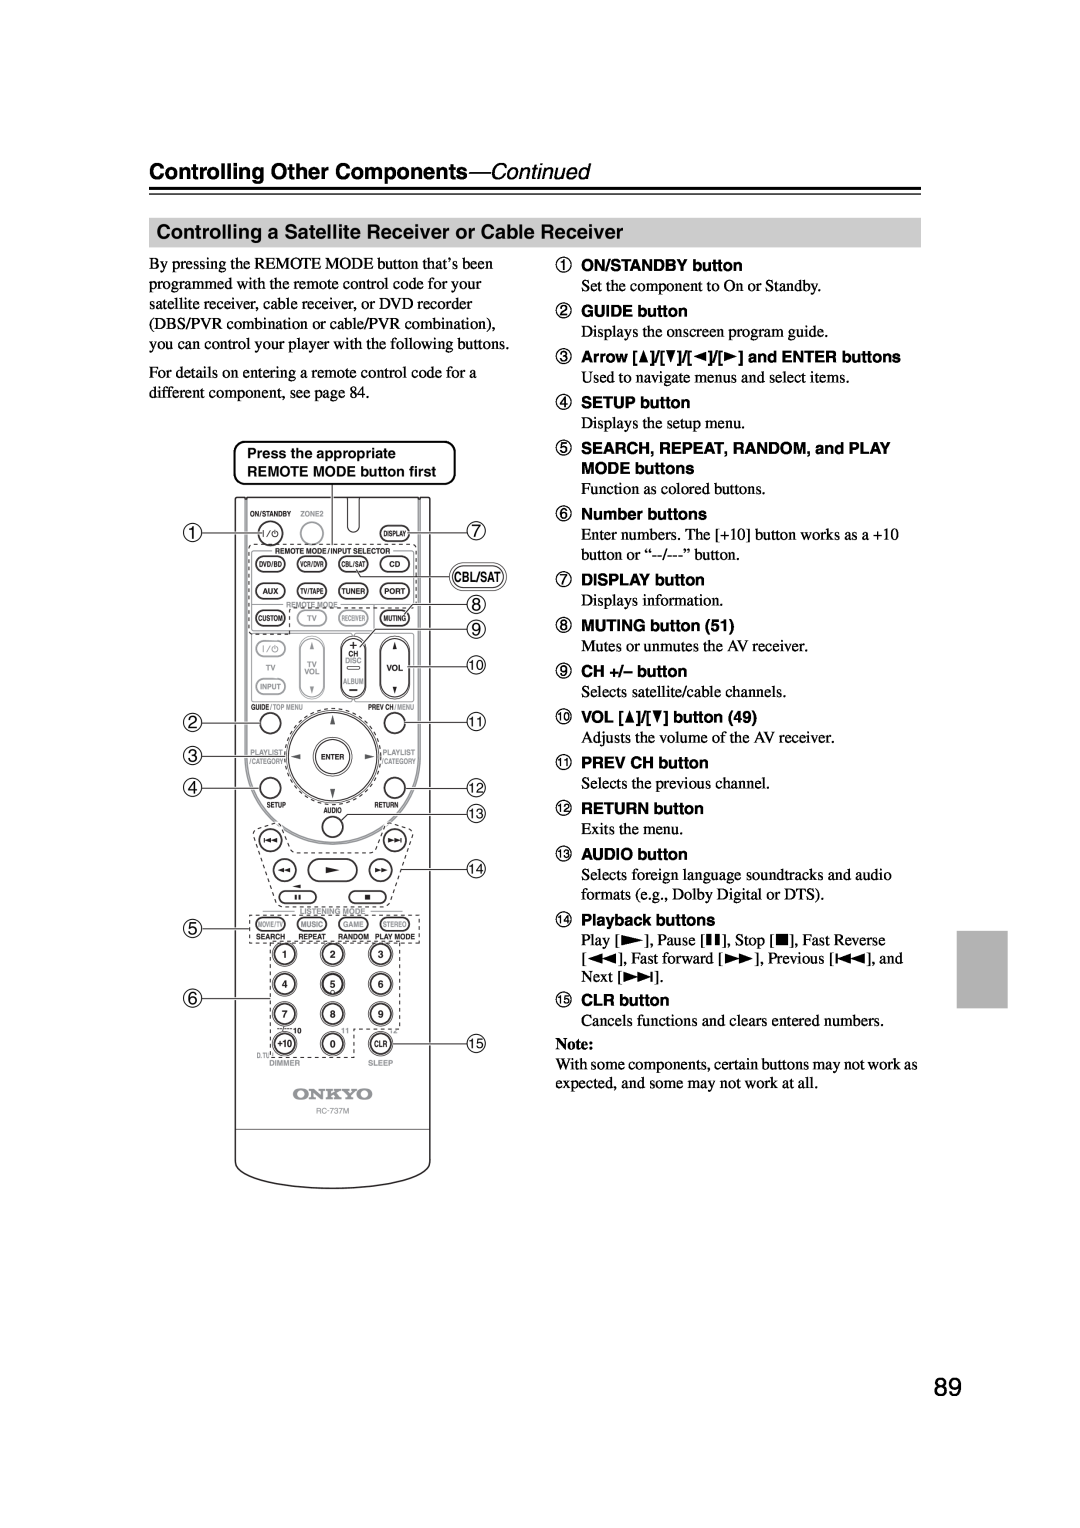 Onkyo HT-S6200, 29344937 instruction manual m n e f o, Controlling Other Components—Continued 